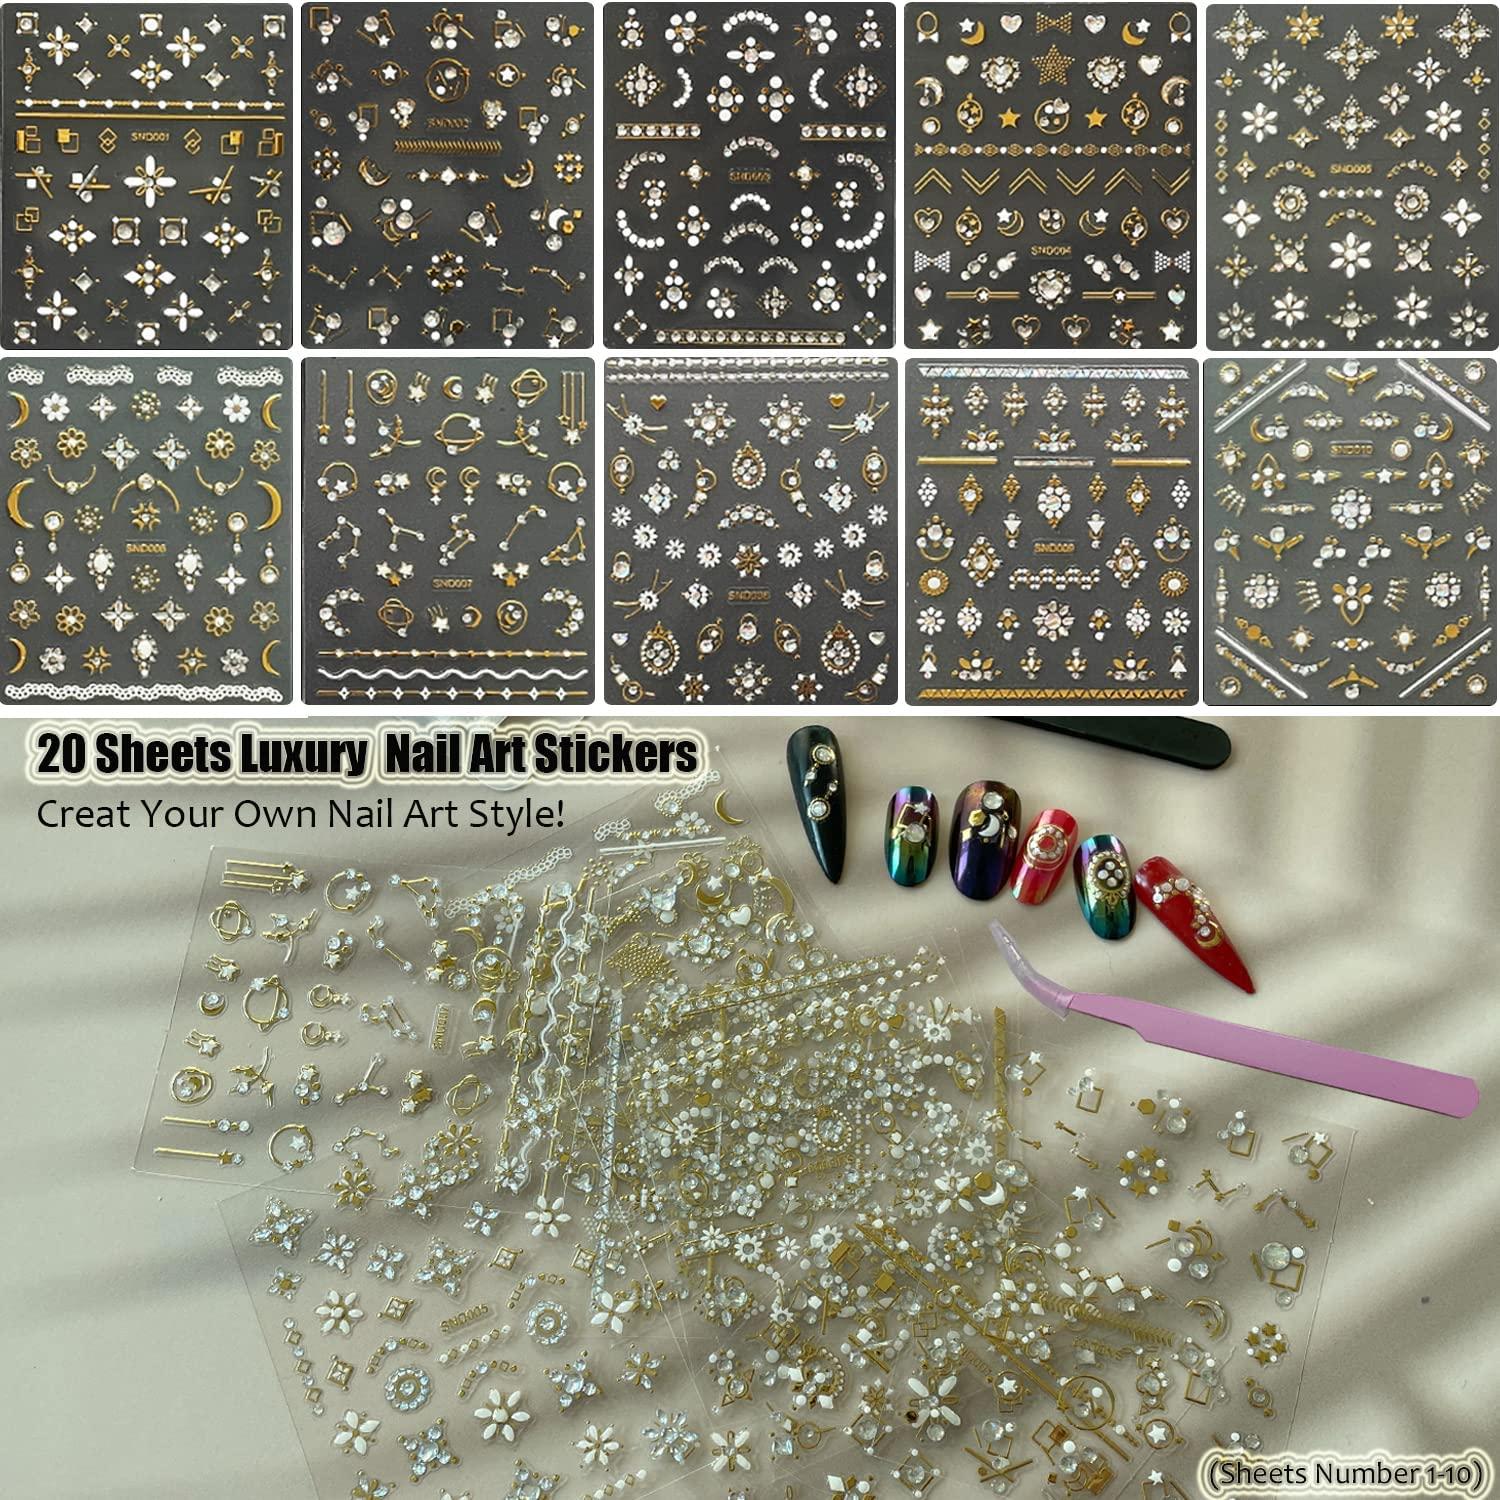  1 Lage Sheet Gold Shiny Nail Stickers Luxury Nail Salon Design  Chic 3D Nail Art Stickers Decals Self-Adhesive Manicure for Nails  Decoration (003) : Beauty & Personal Care